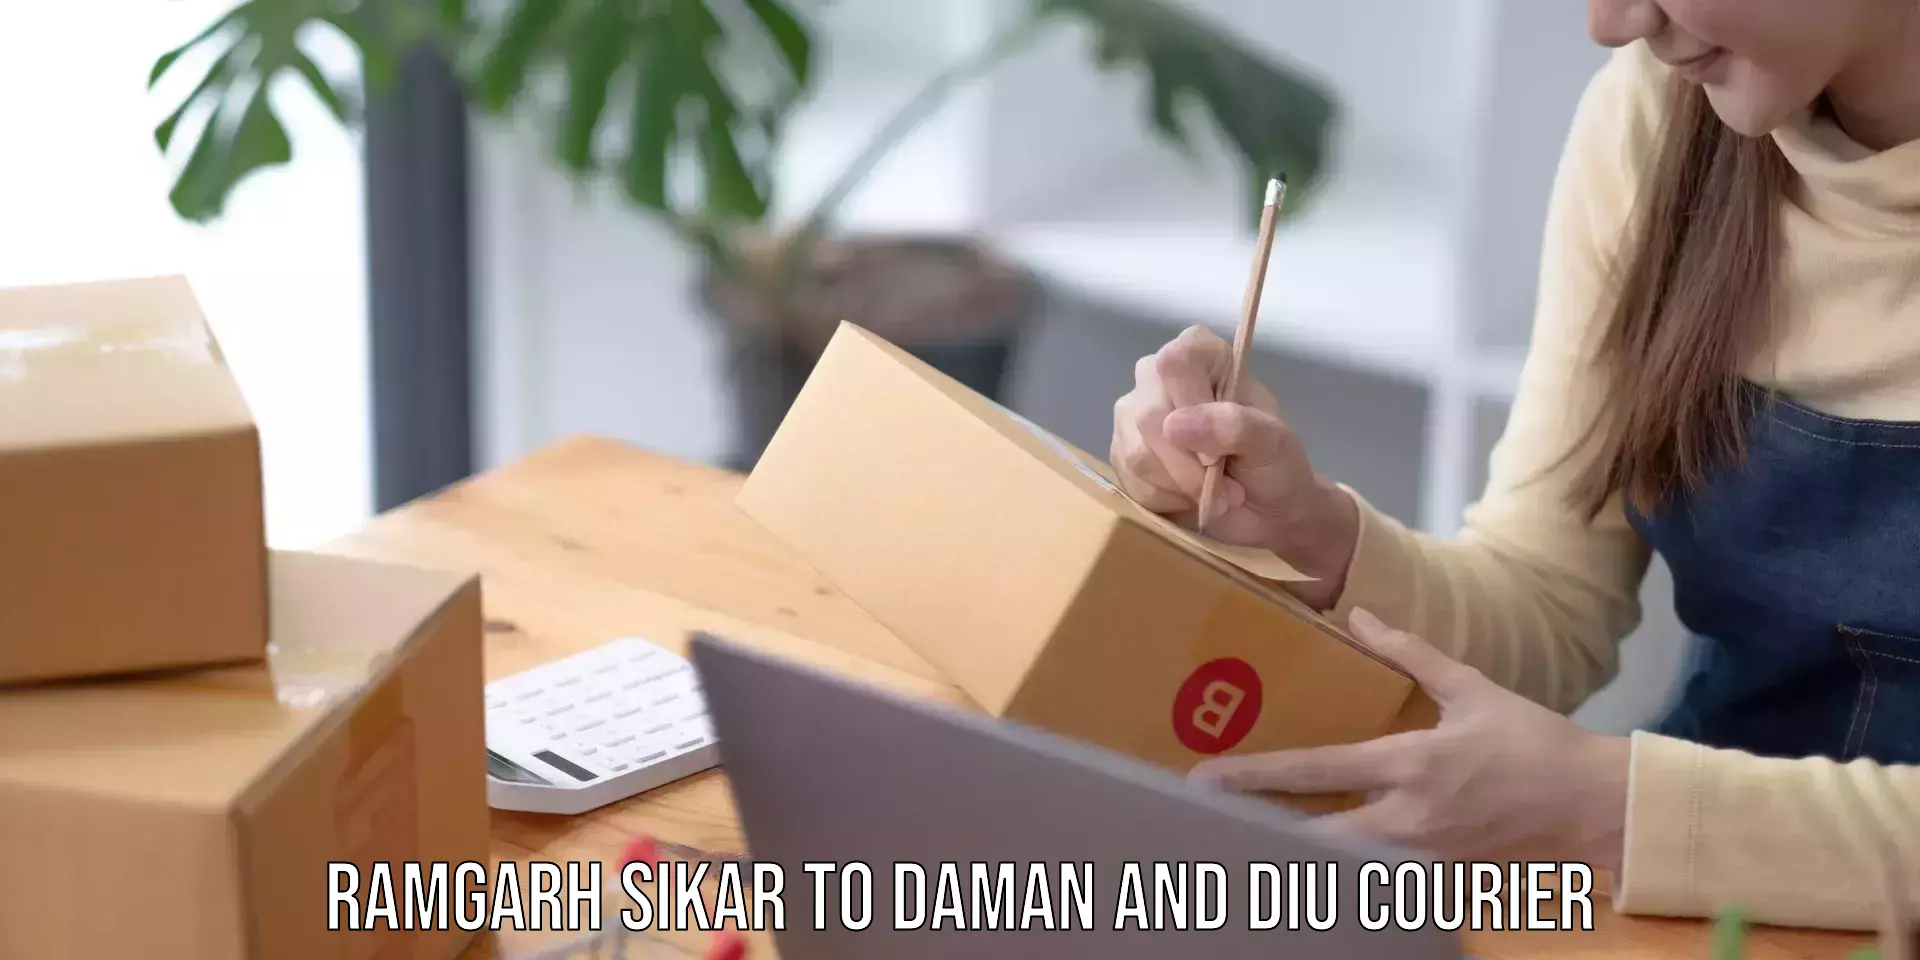 Personalized courier experiences Ramgarh Sikar to Daman and Diu